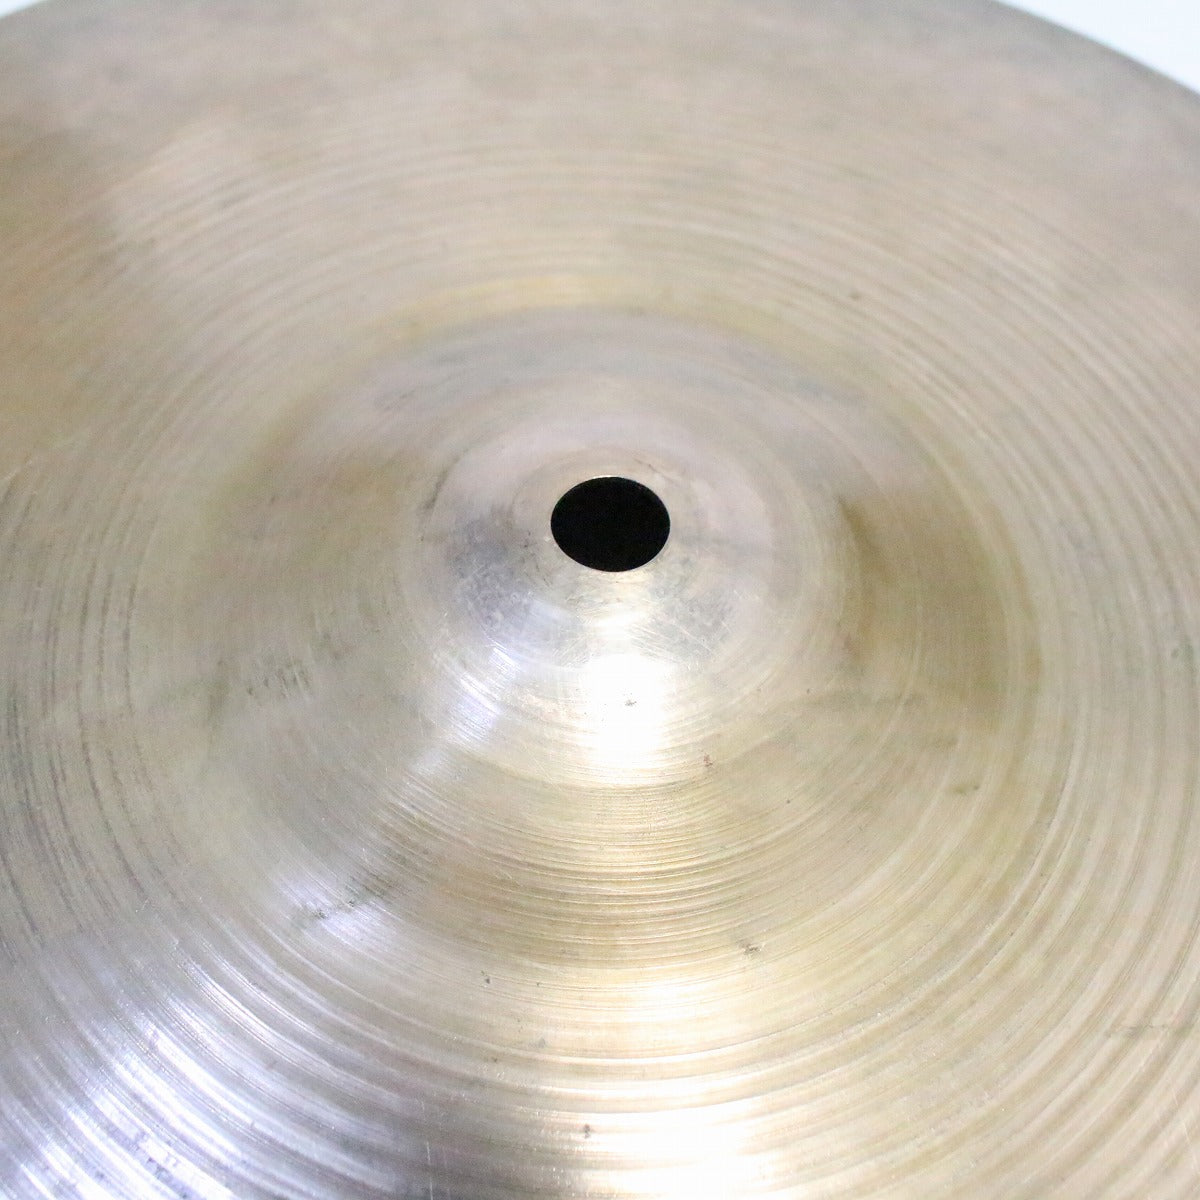 USED ZILDJIAN / Late50s A Small Stamp 14inch HIHAT 744/784g Old A Hi-Hat Cymbal [08]